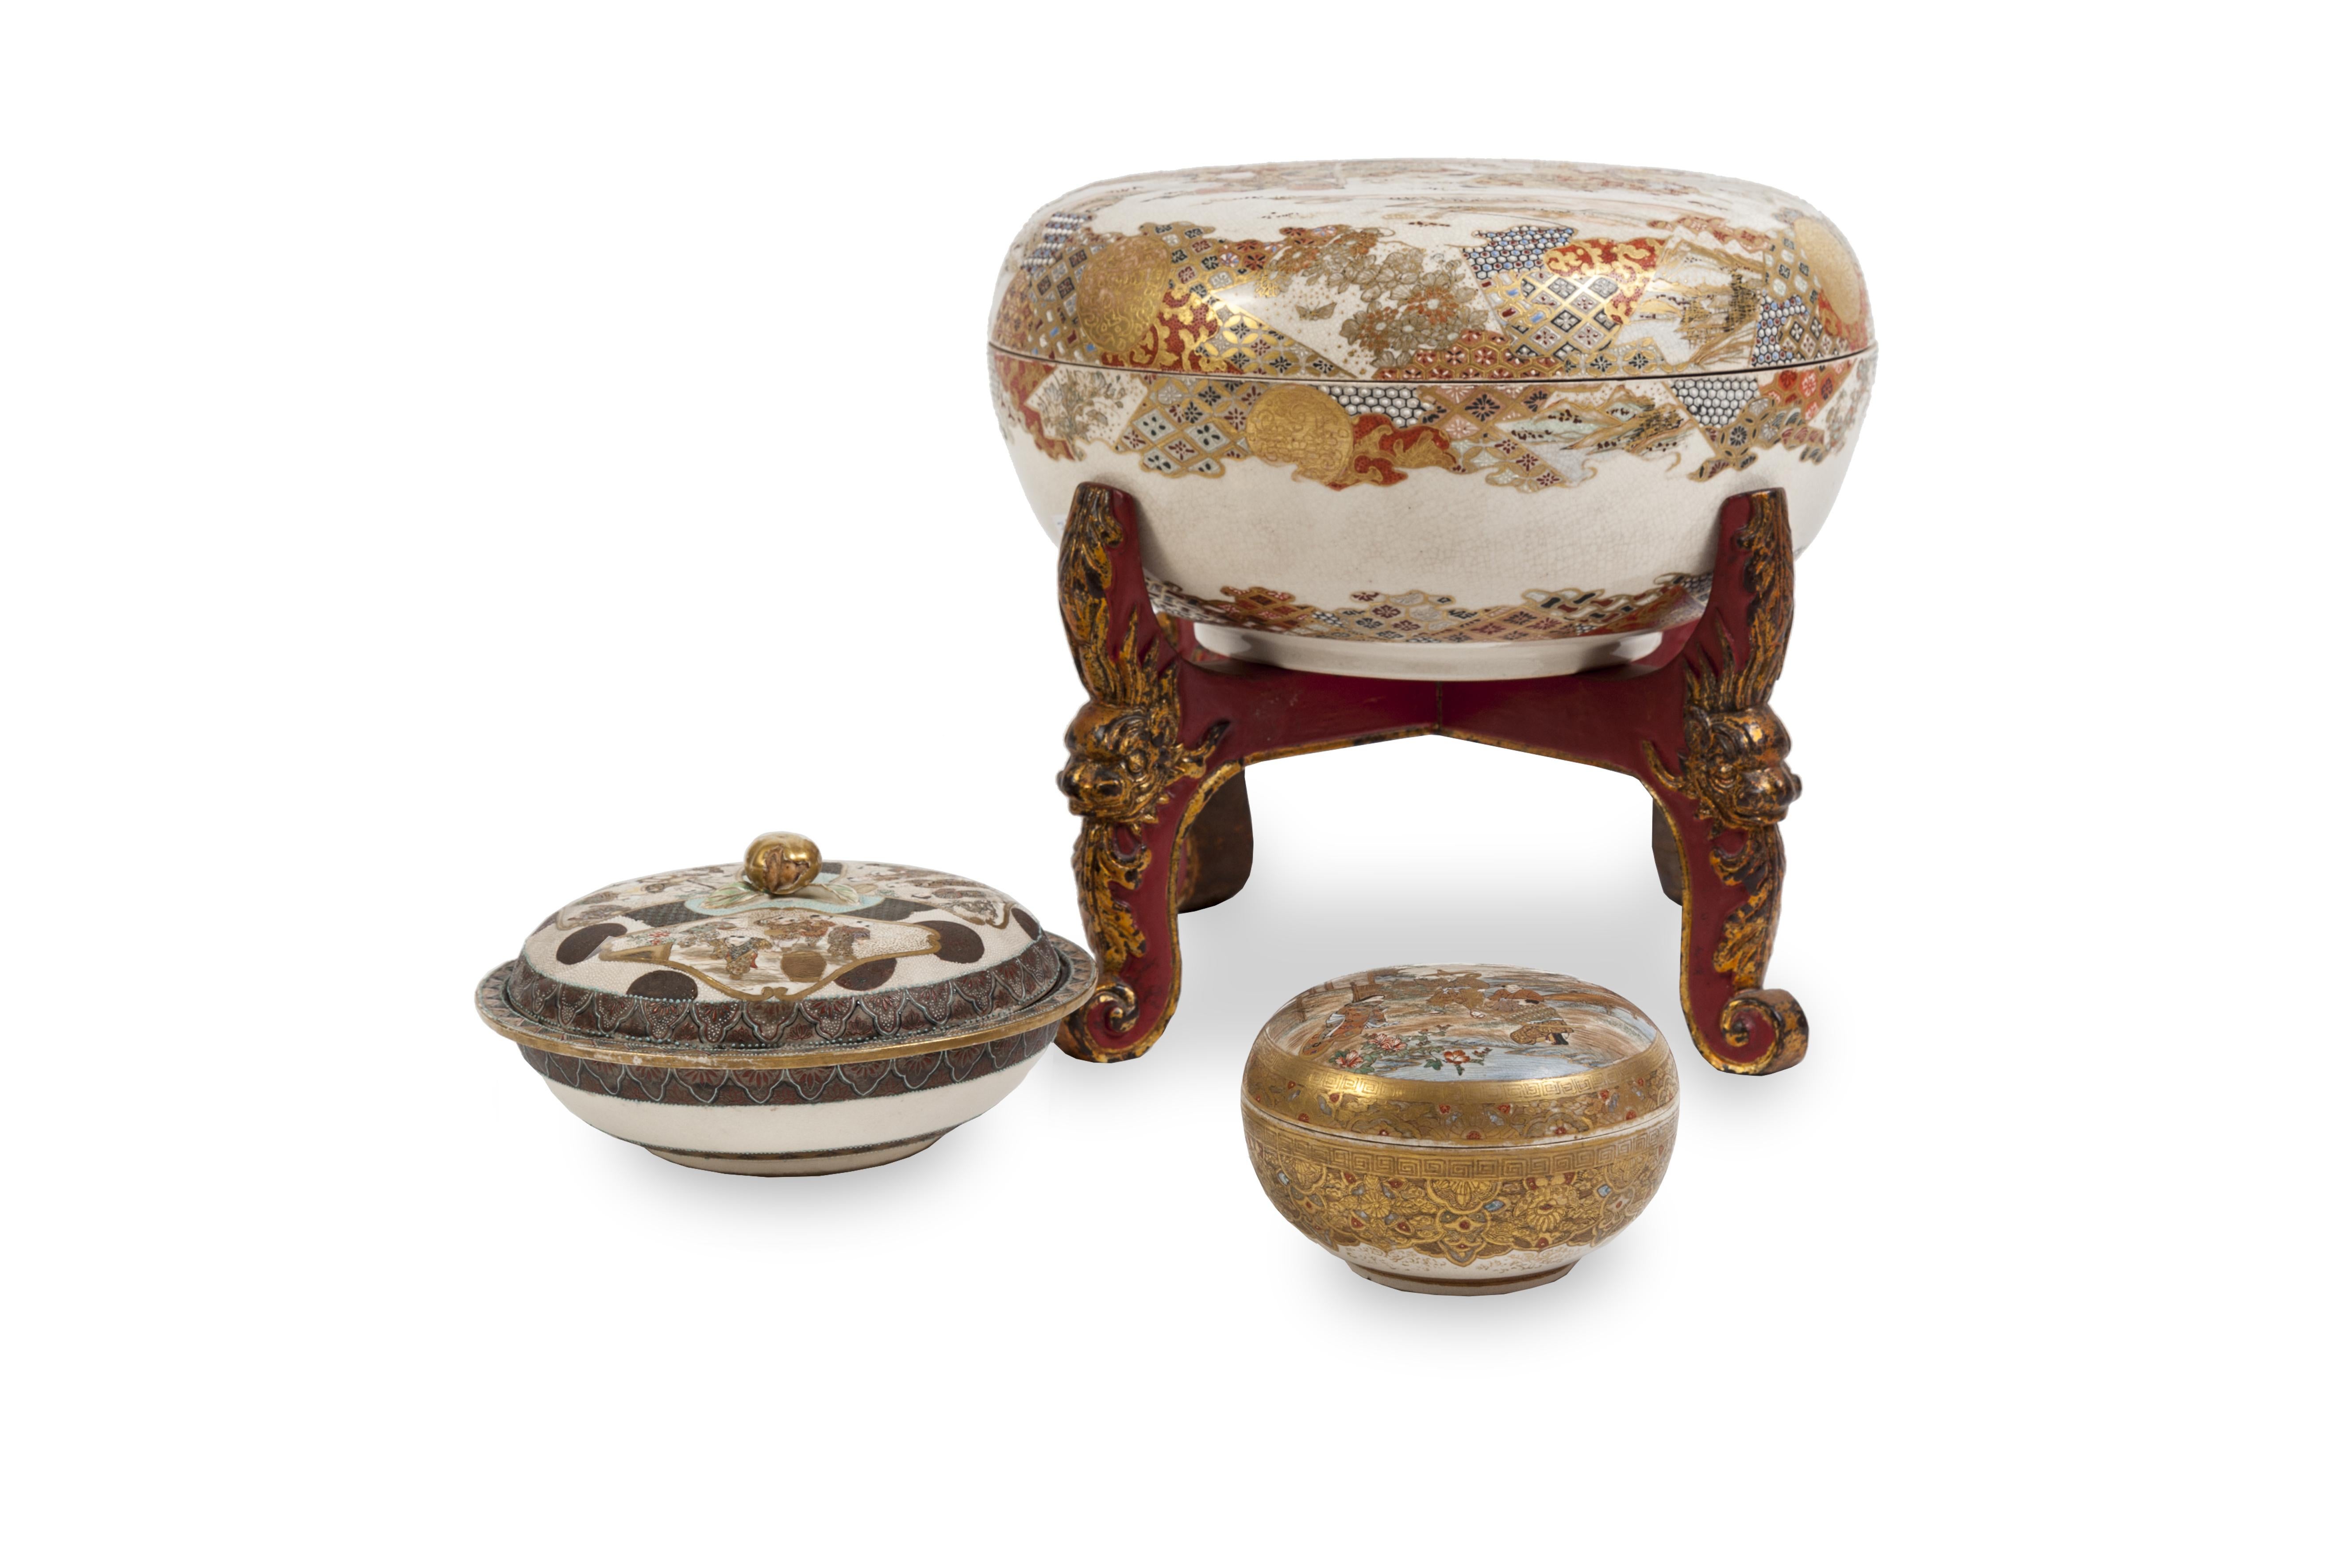 Enameled Satsuma Box on its Wooden Display Stand, circa 1850 For Sale